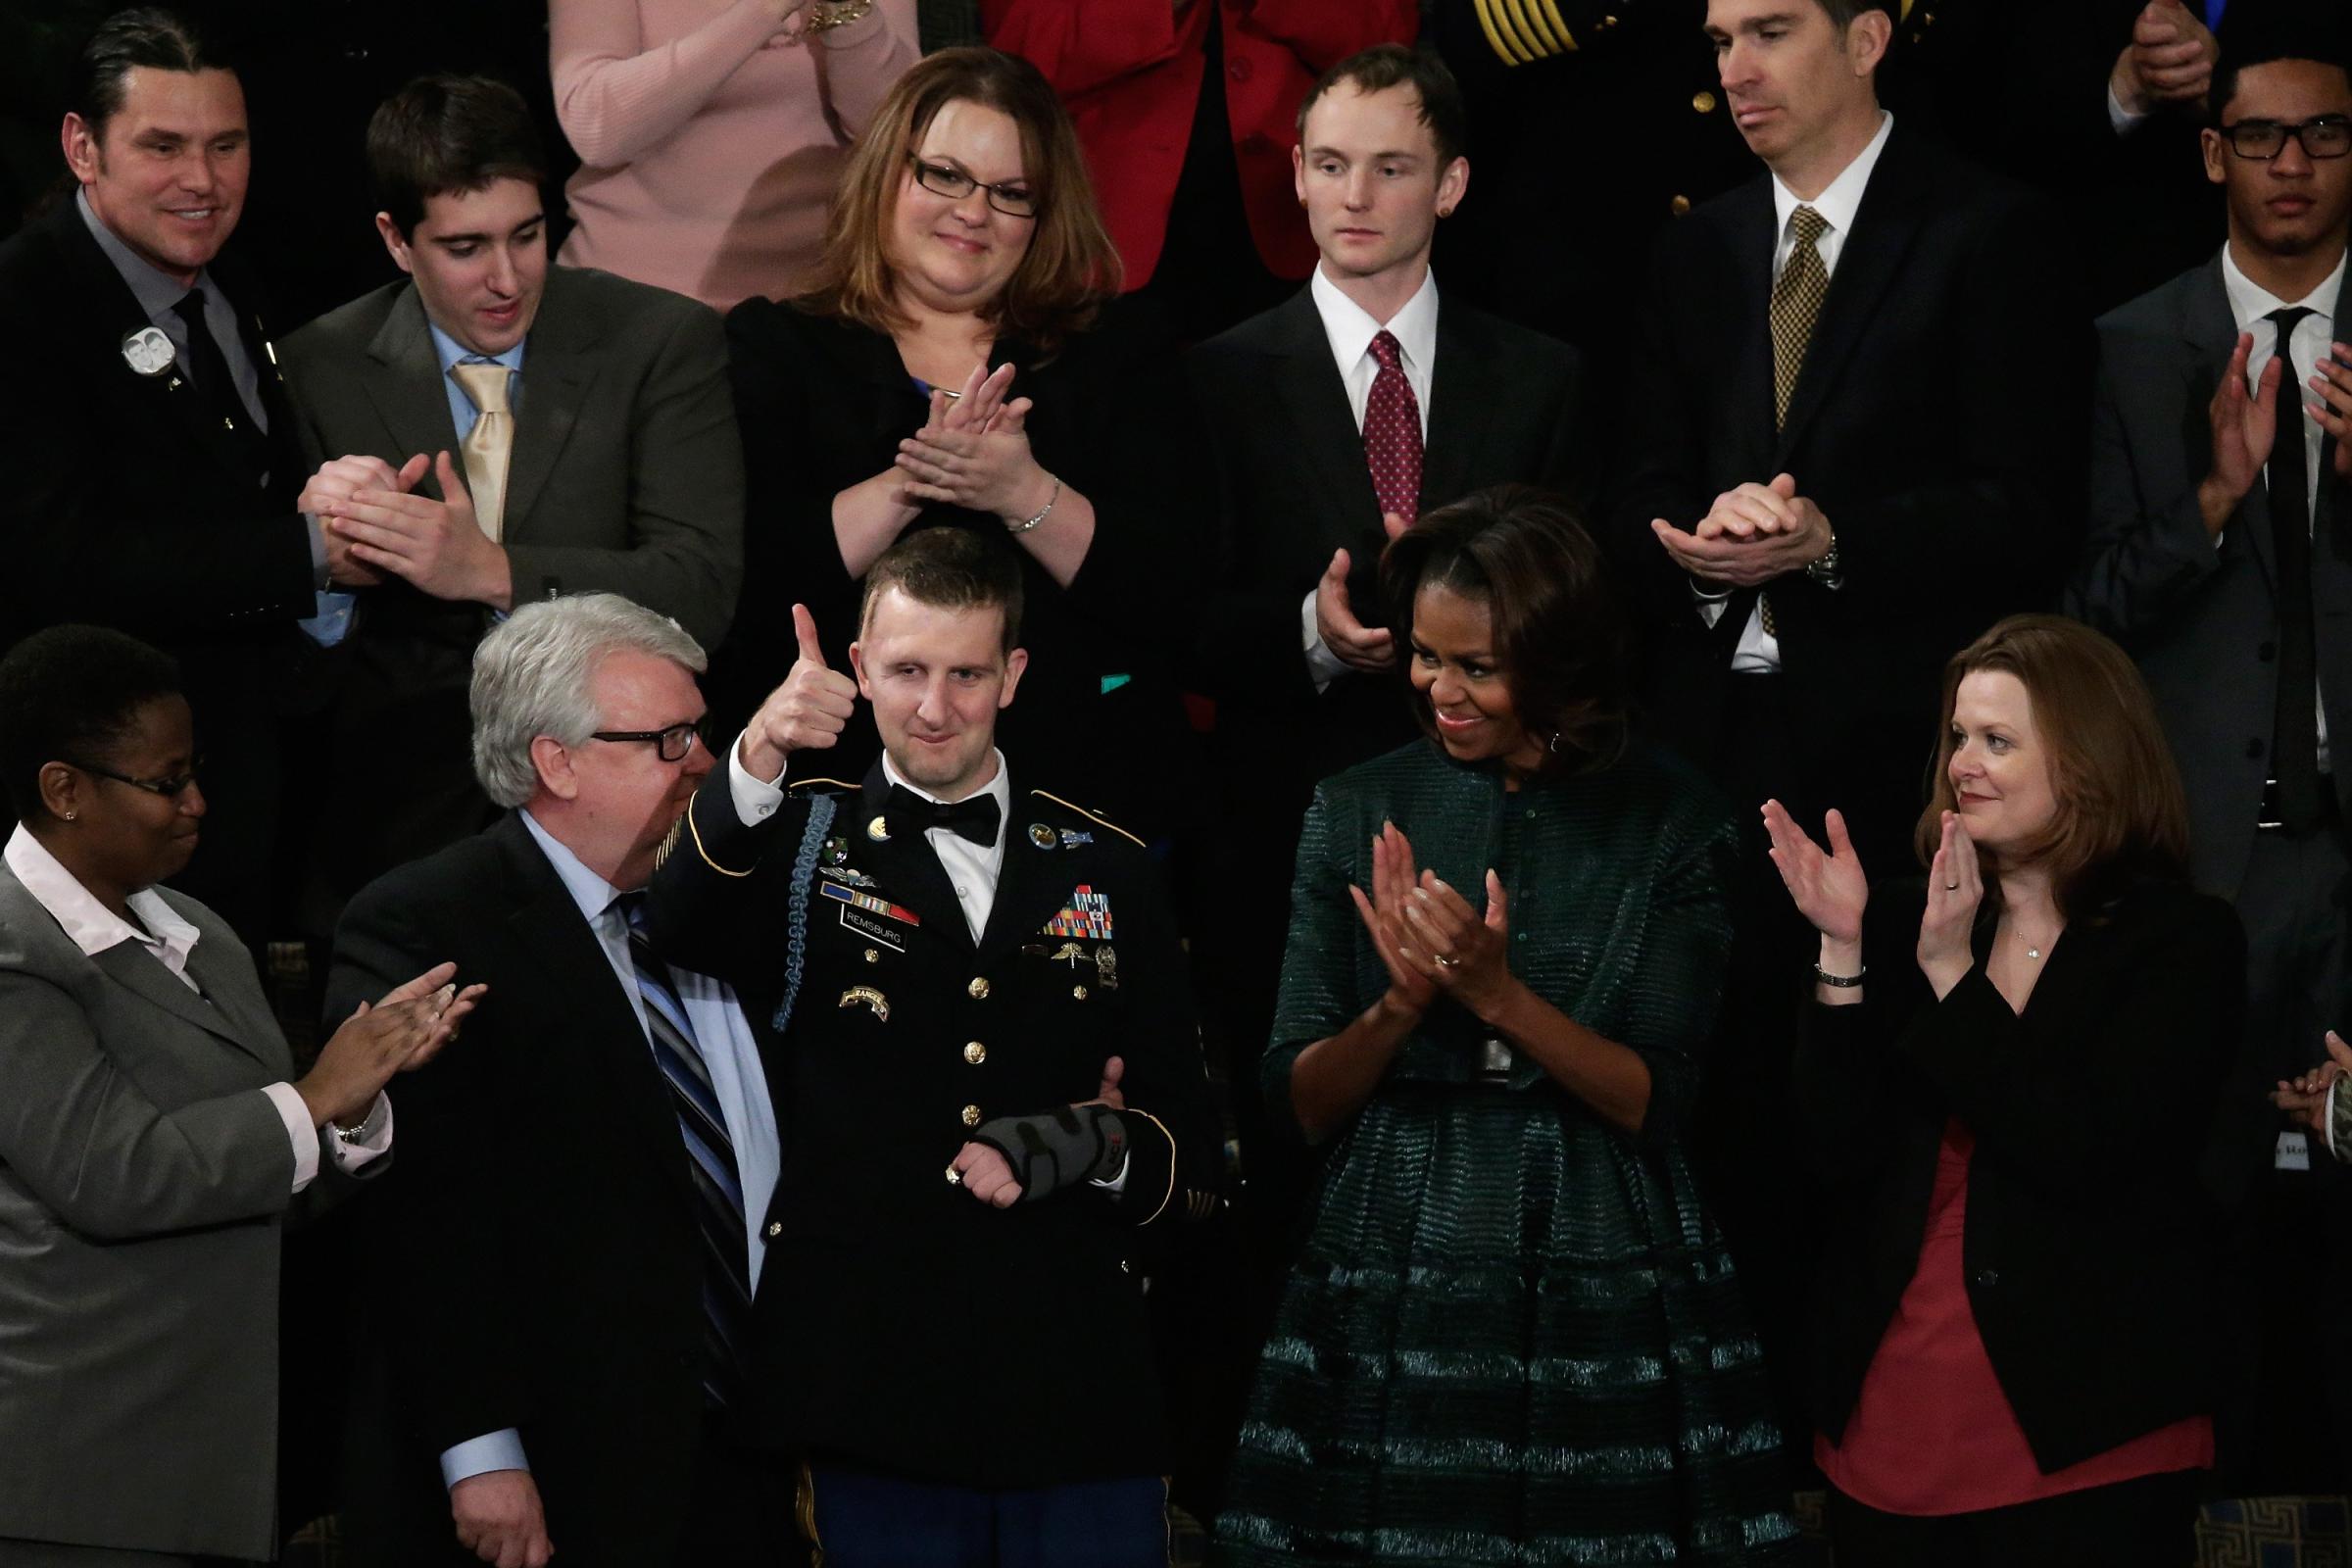 U.S. Army Ranger Sgt. First Class Cory Remsburg gives a thumbs up as he receives a standing ovation during the State of the Union.